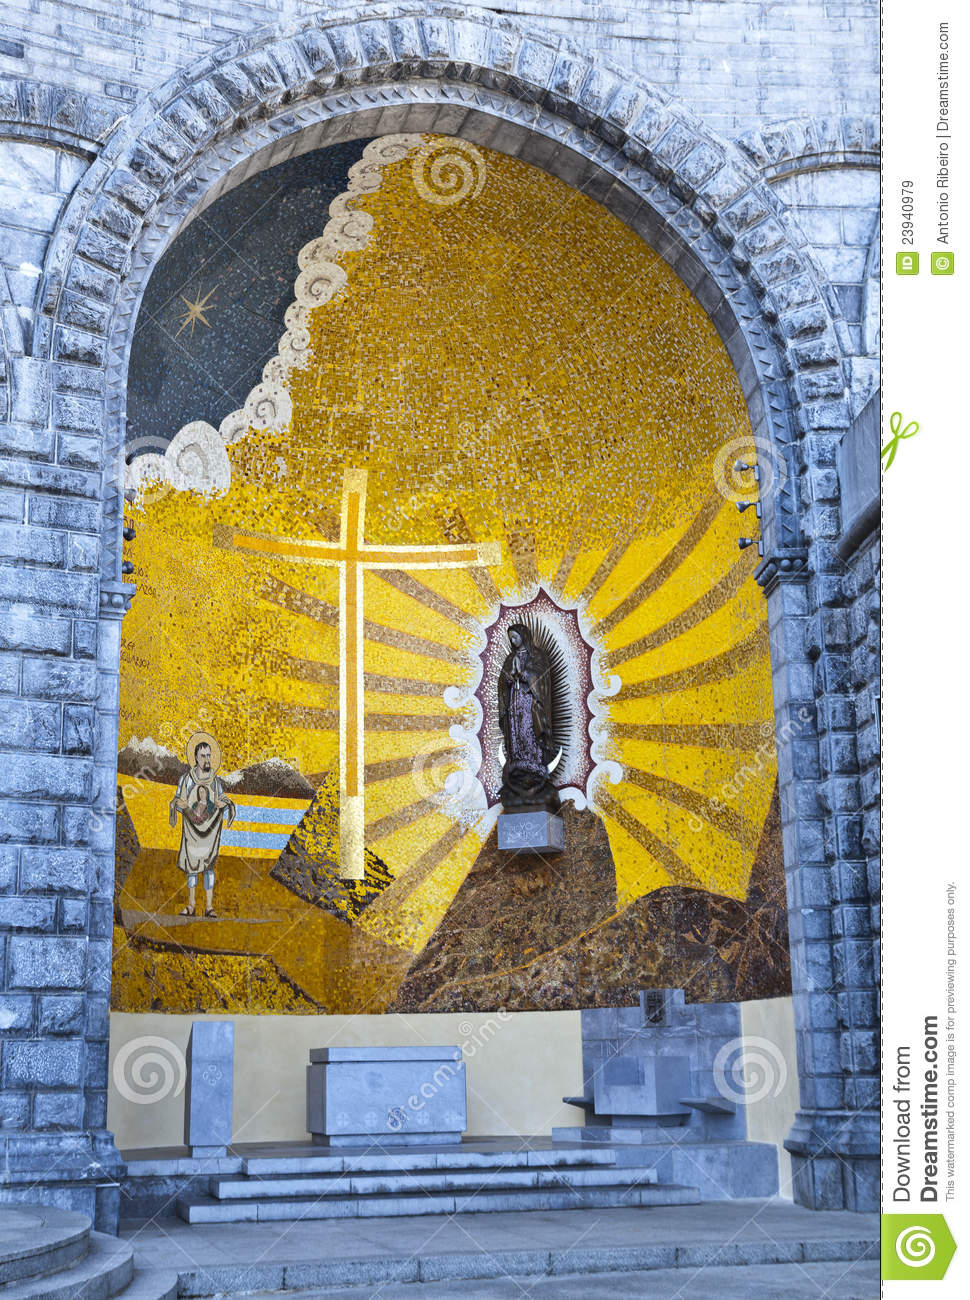 Basilica Of Our Lady Of The Rosary Royalty Free Stock Images   Image    